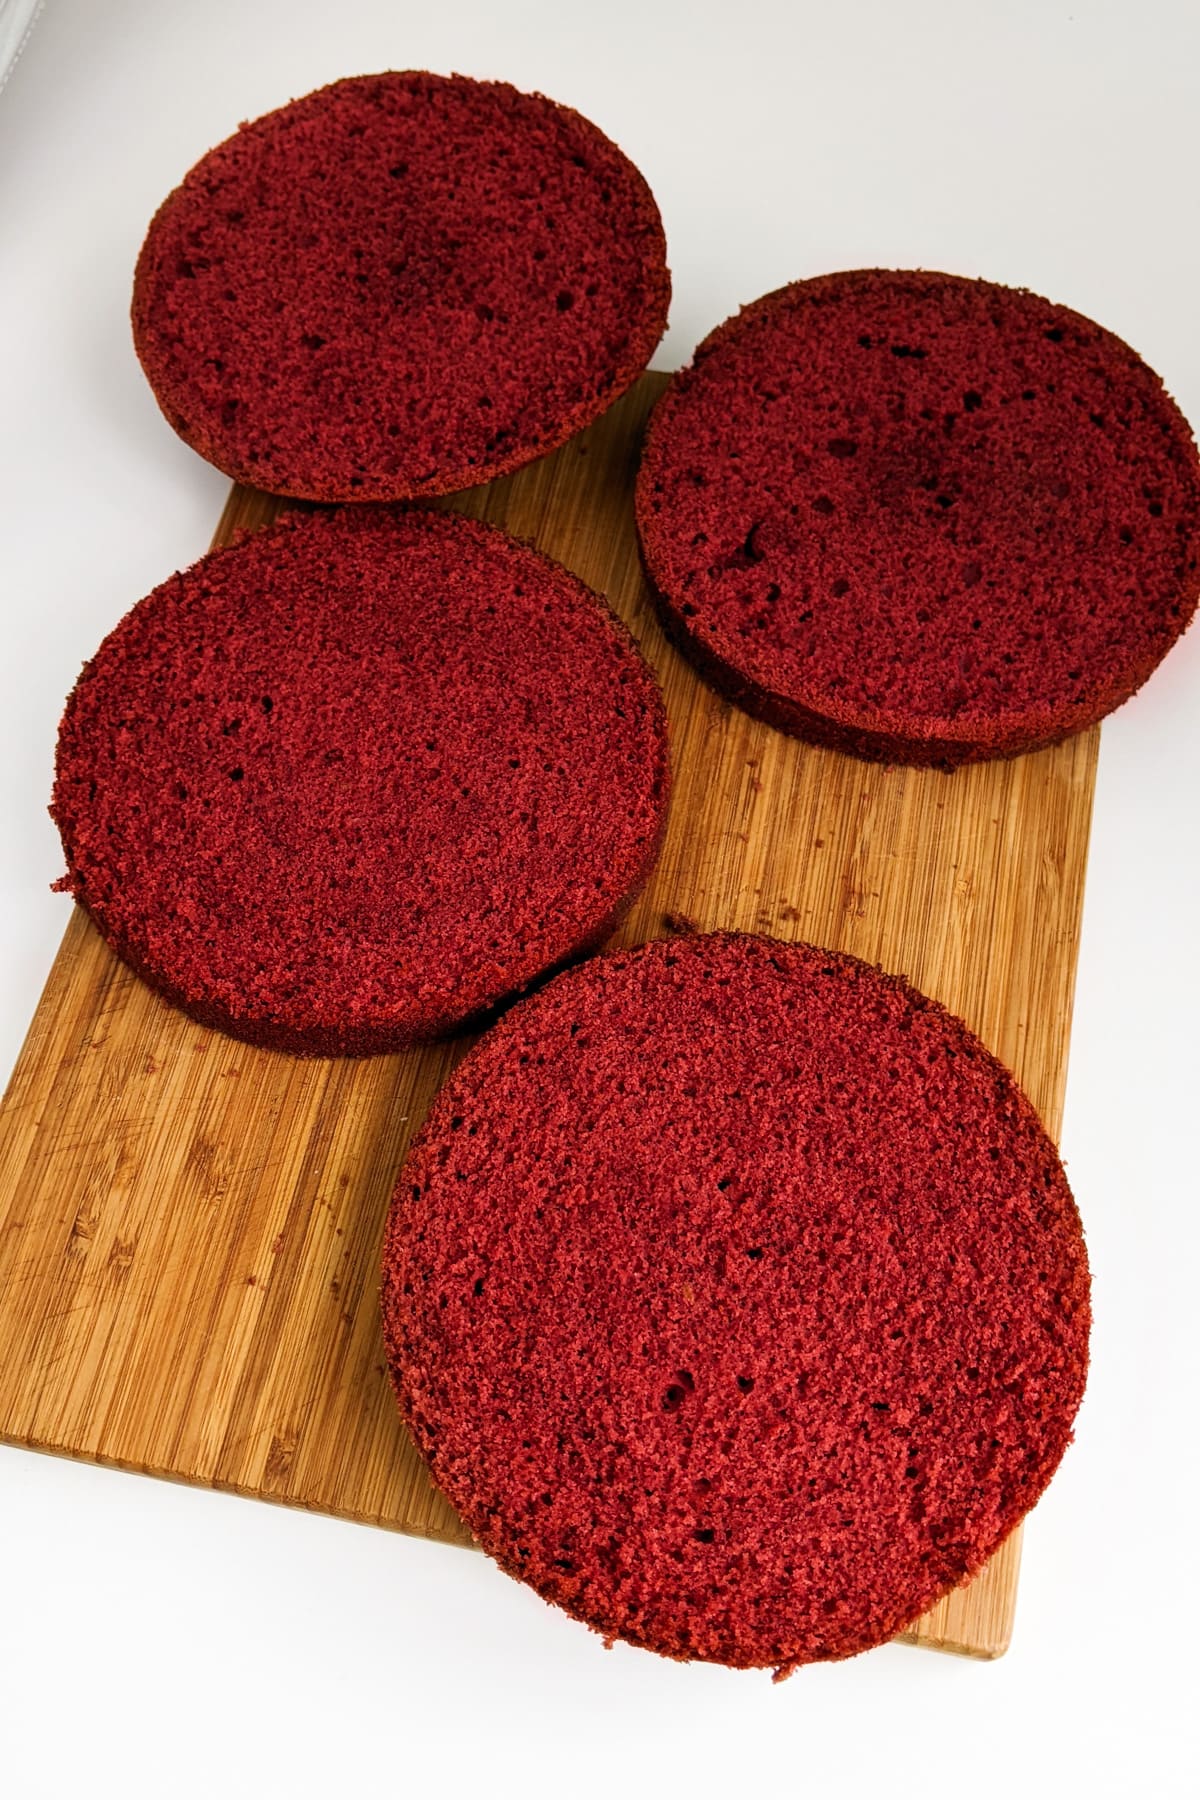 Red velvet cake sliced in 4 parts on a cutting board.